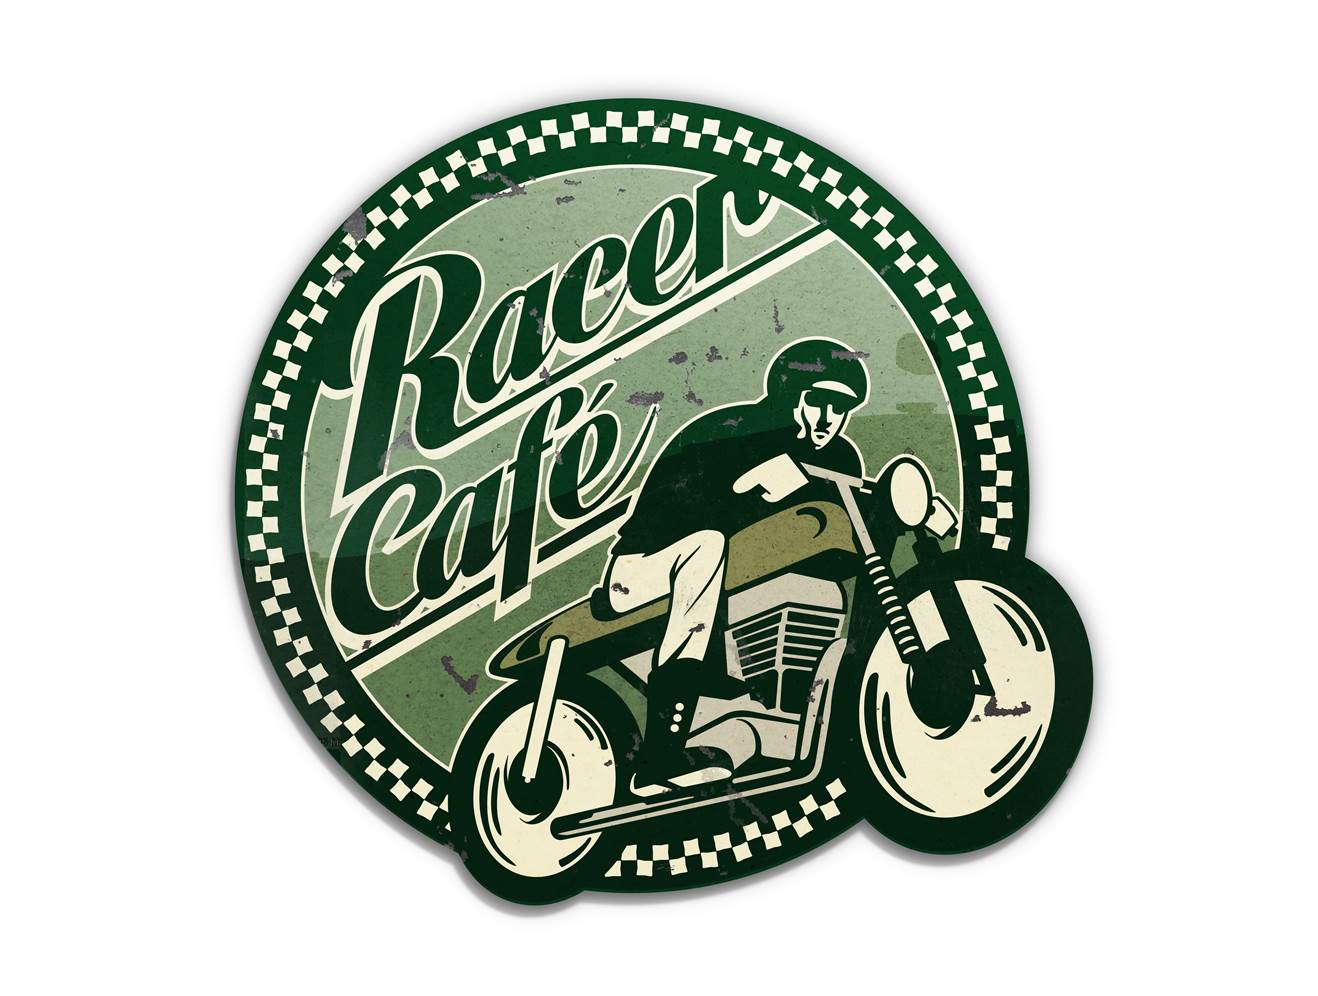 racer_cafe_prototyping_3